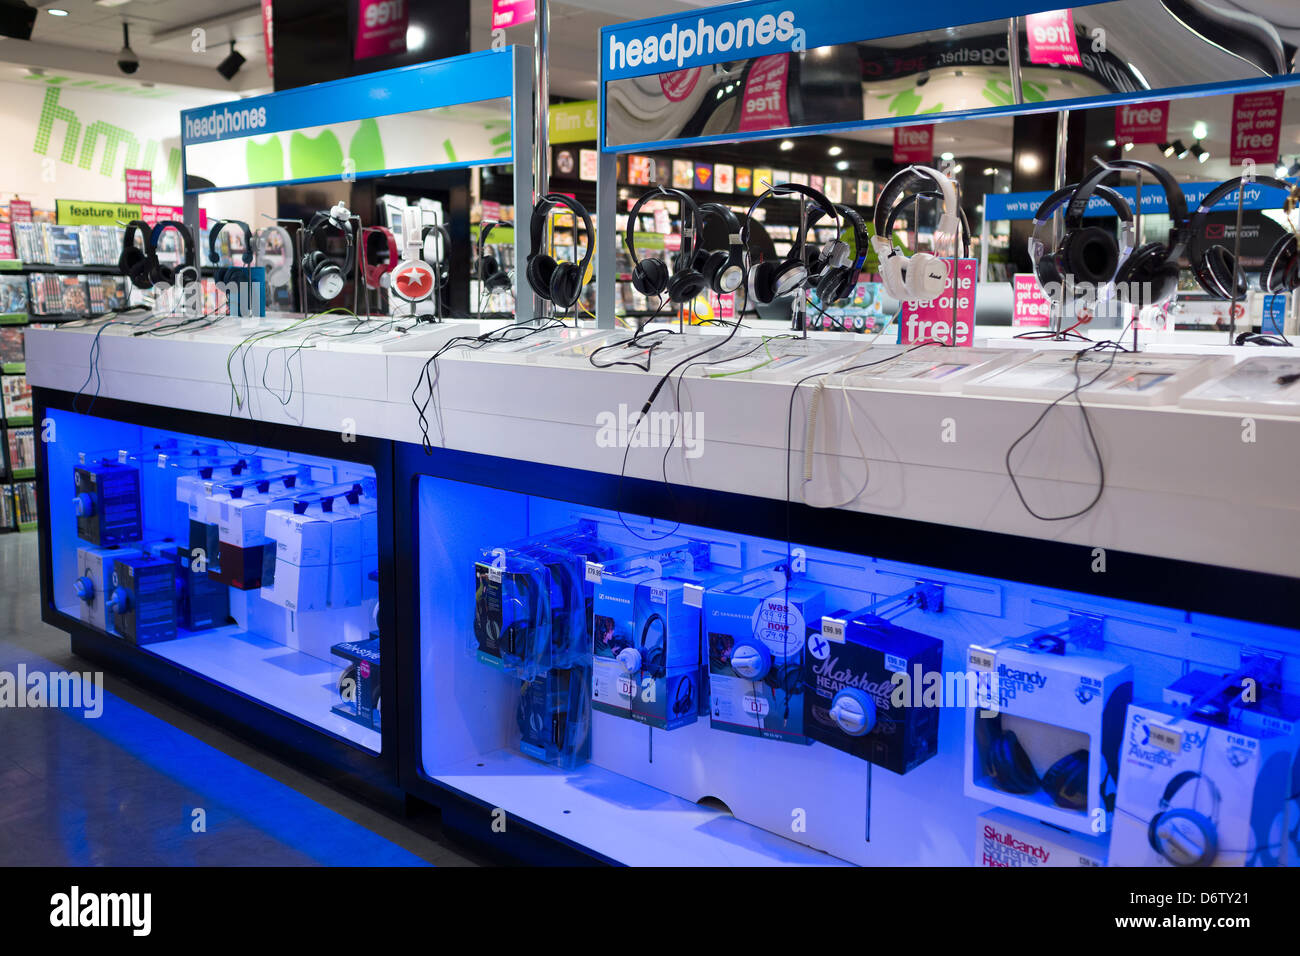 Headphones at the HMV music store in the Metrocentre. Stock Photo